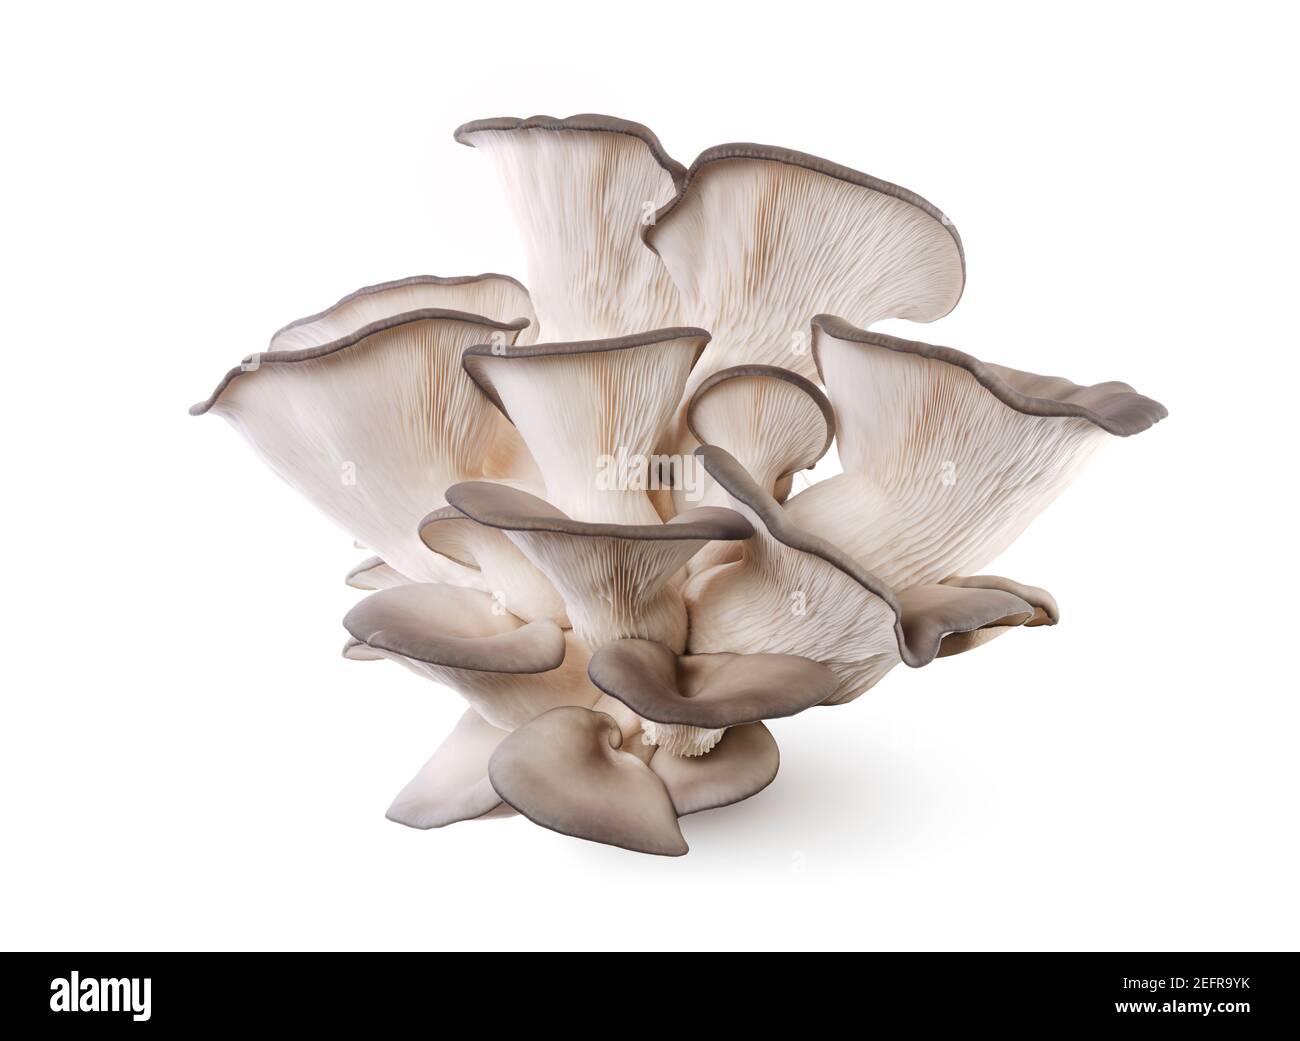 King Oyster mushrooms, Pleurotus eryngii, also known as King trumpet mushrooms or French horn mushrooms, isolated on white studio background. Stock Photo